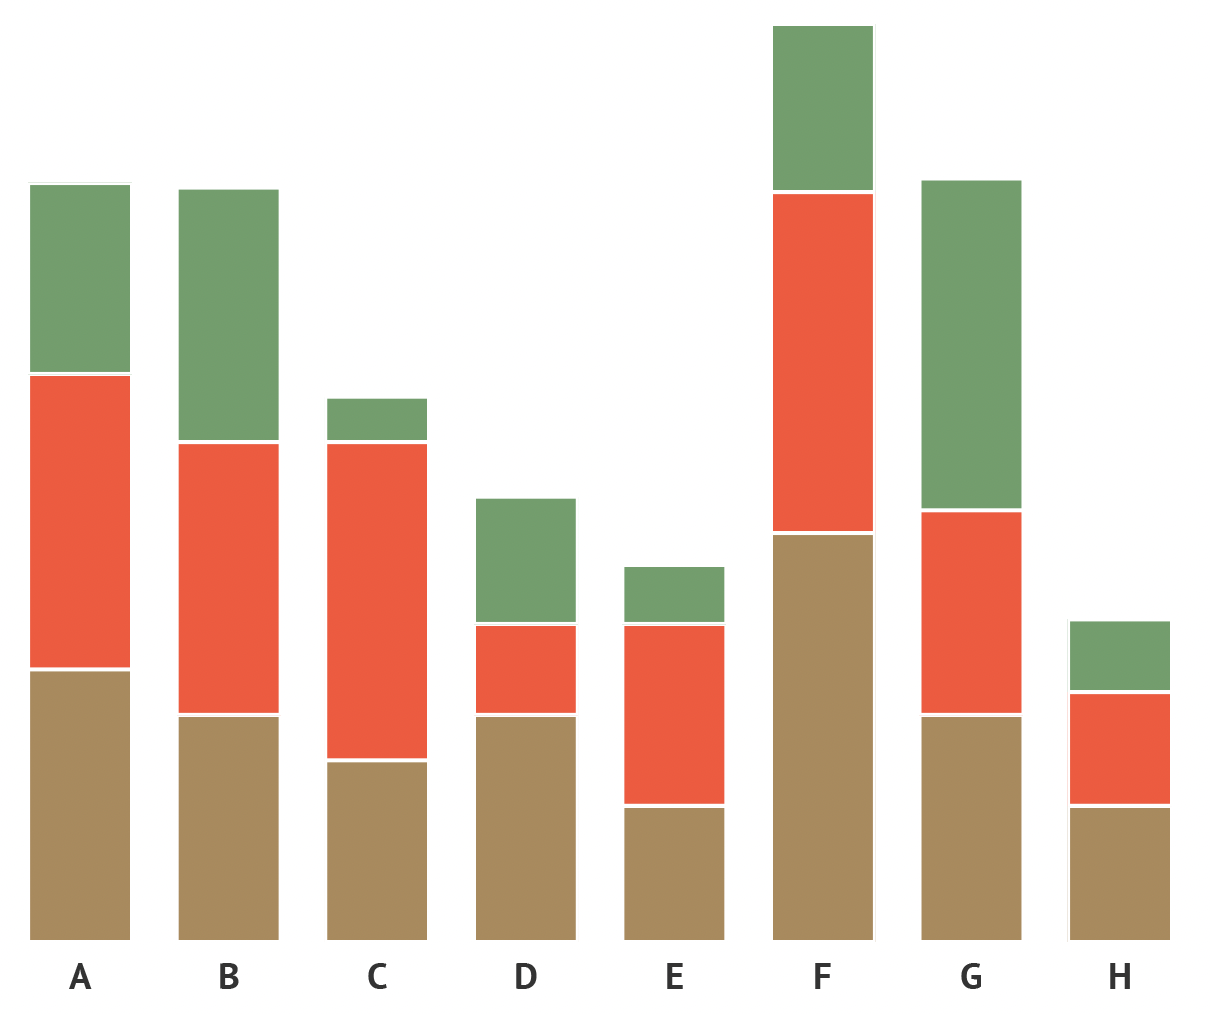 Again the same bar chart, with green, red and brown, but this time all rectangles are separated from each other with white strokes